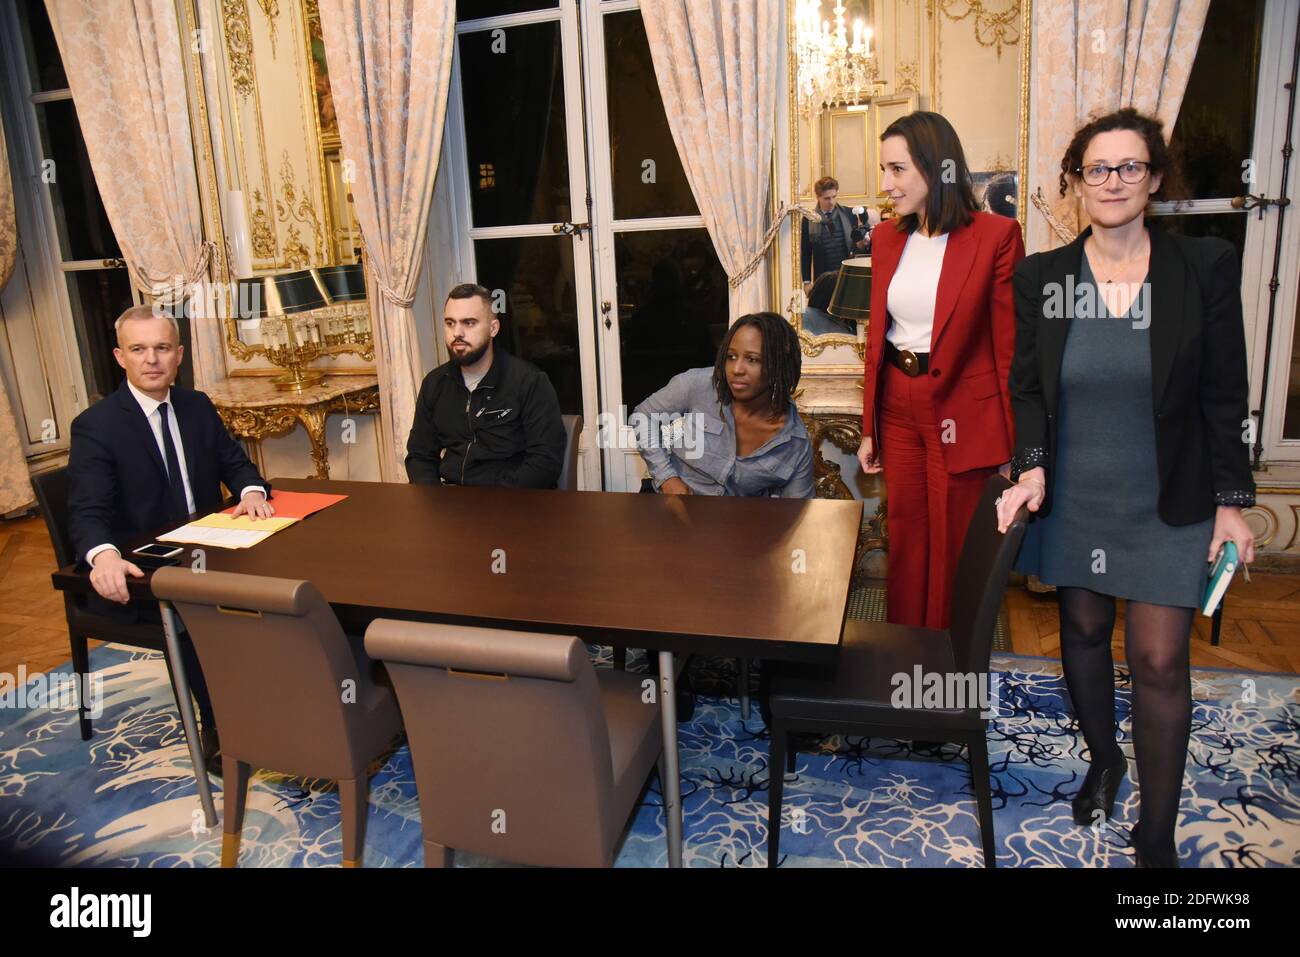 Minister for the Ecological and Inclusive Transition Francois de Rugy and  Junior Minister attached to the Minister of Ecological and Inclusive  Transition Brune Poirson welcome two representatives of the yellow vests ( Gilets